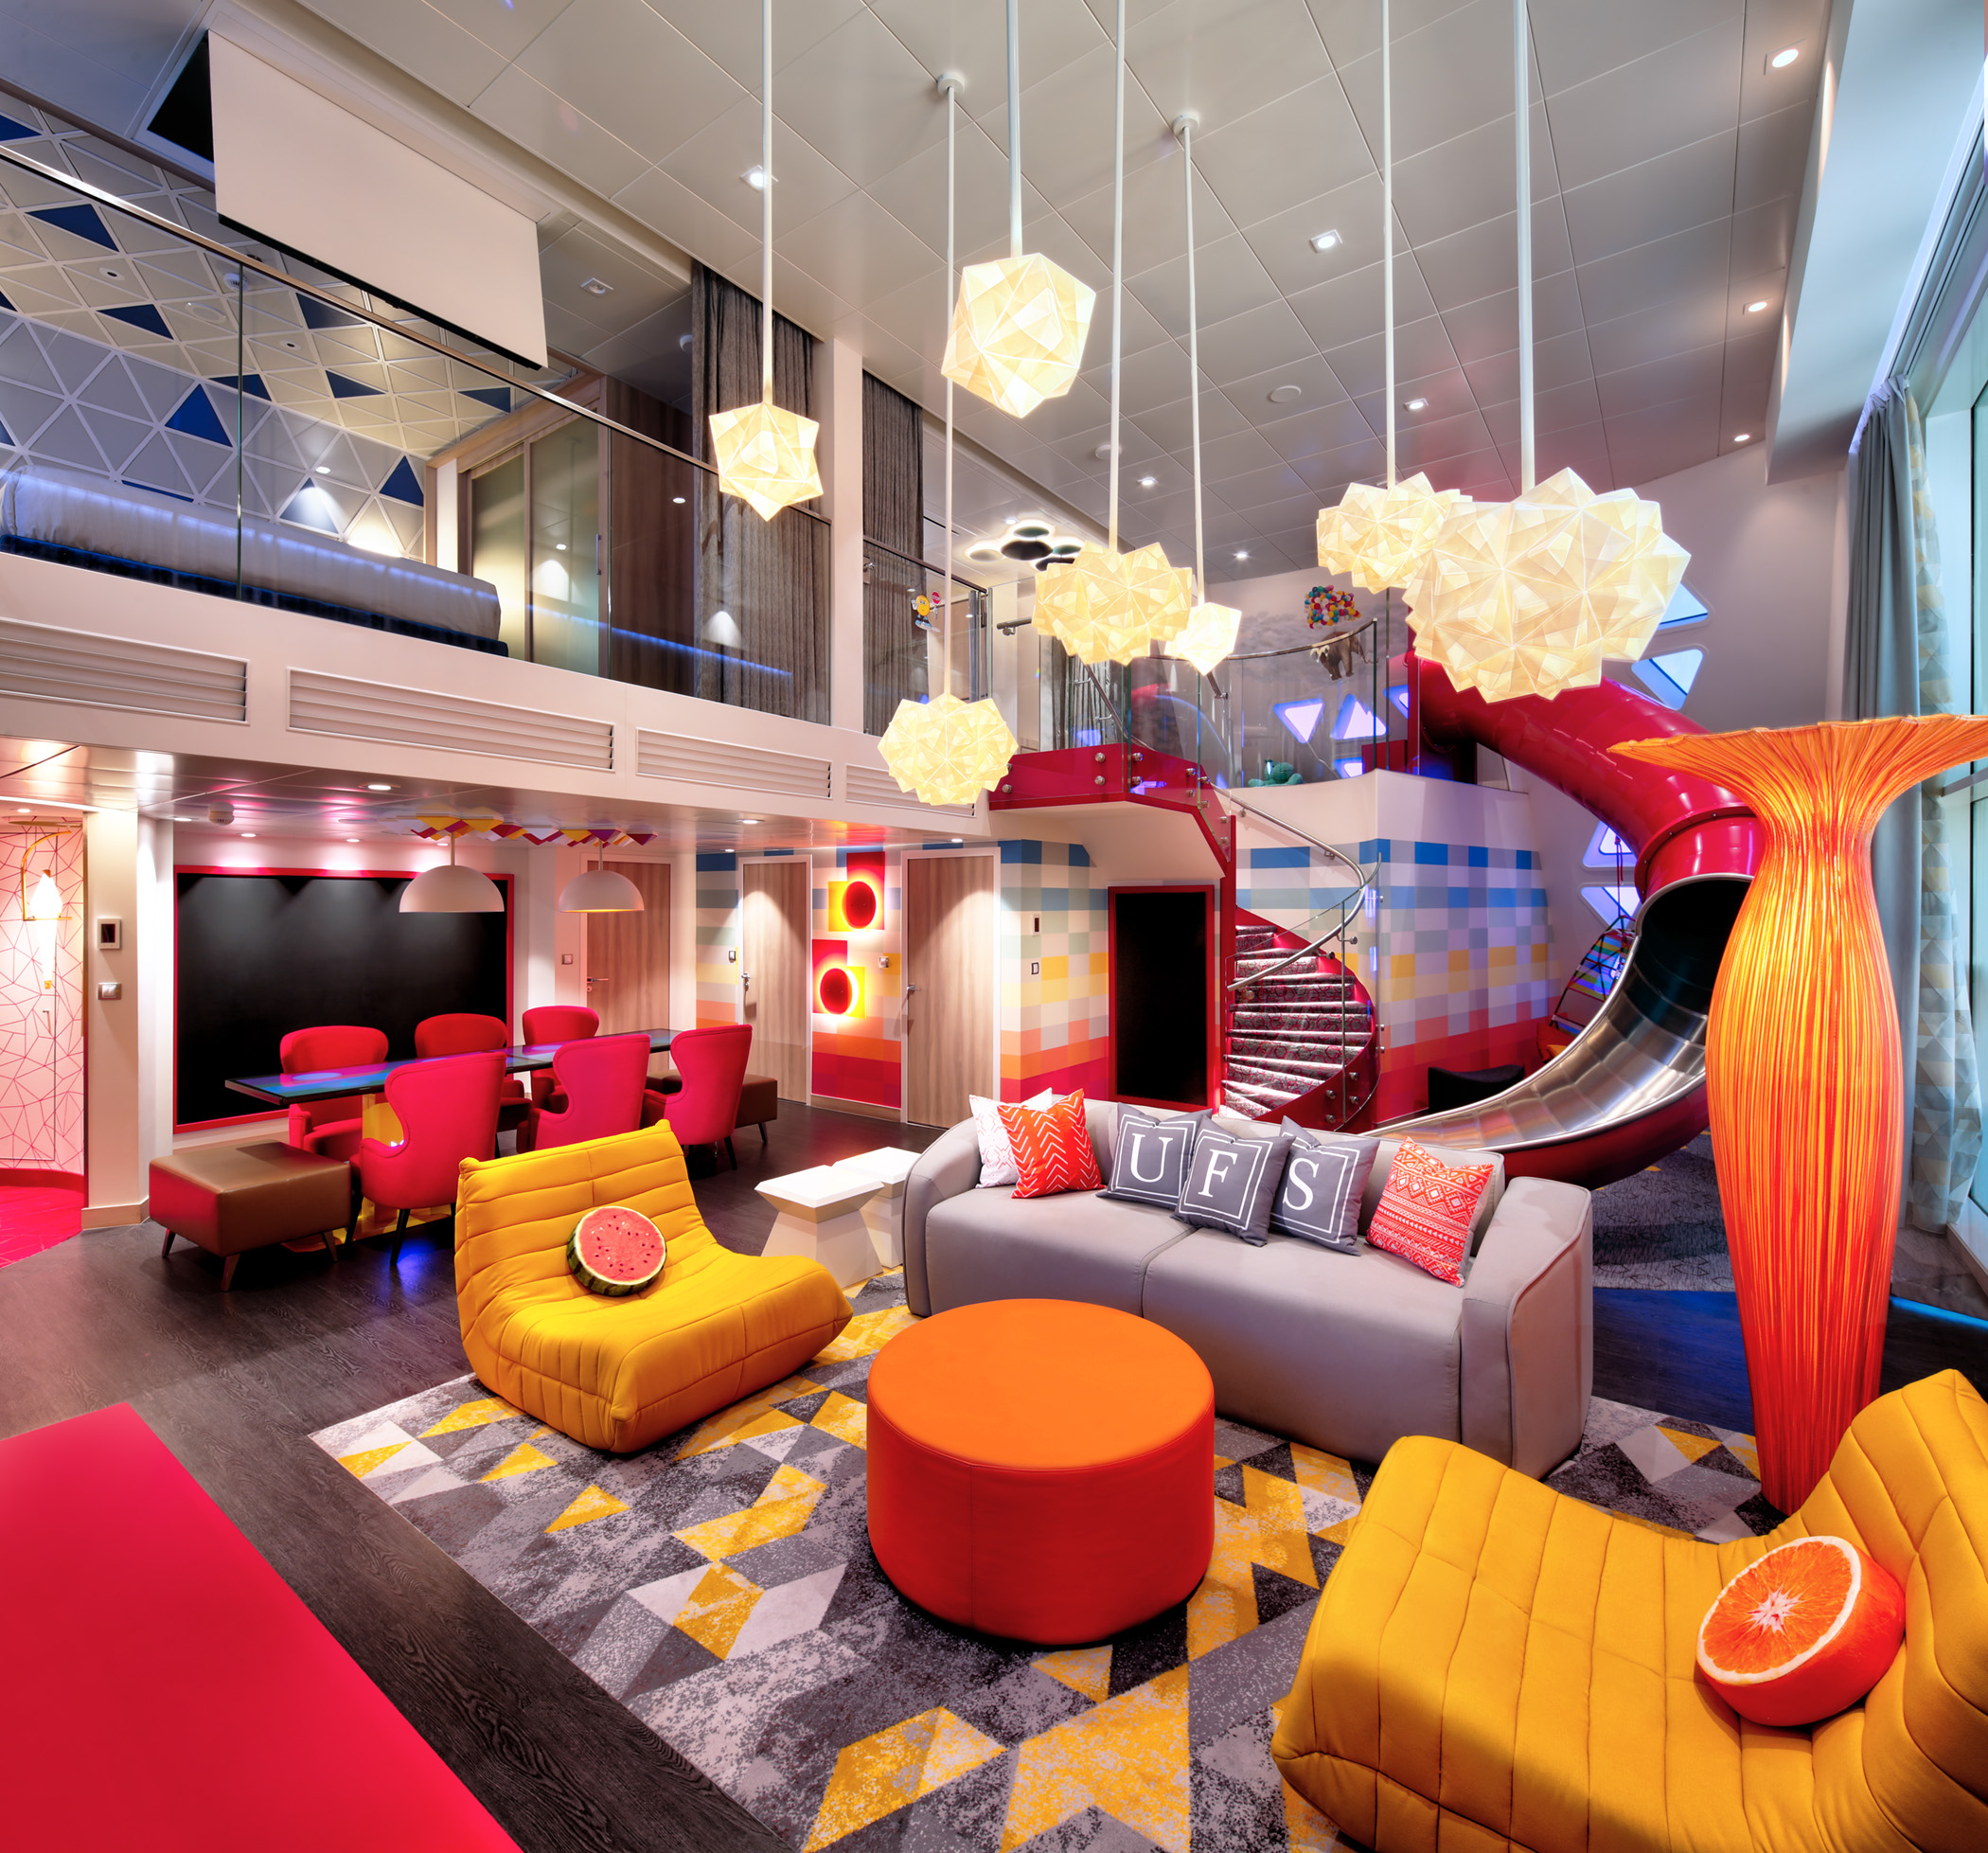 The accommodation on Wonder of the Seas helps teens reach new heights of fun